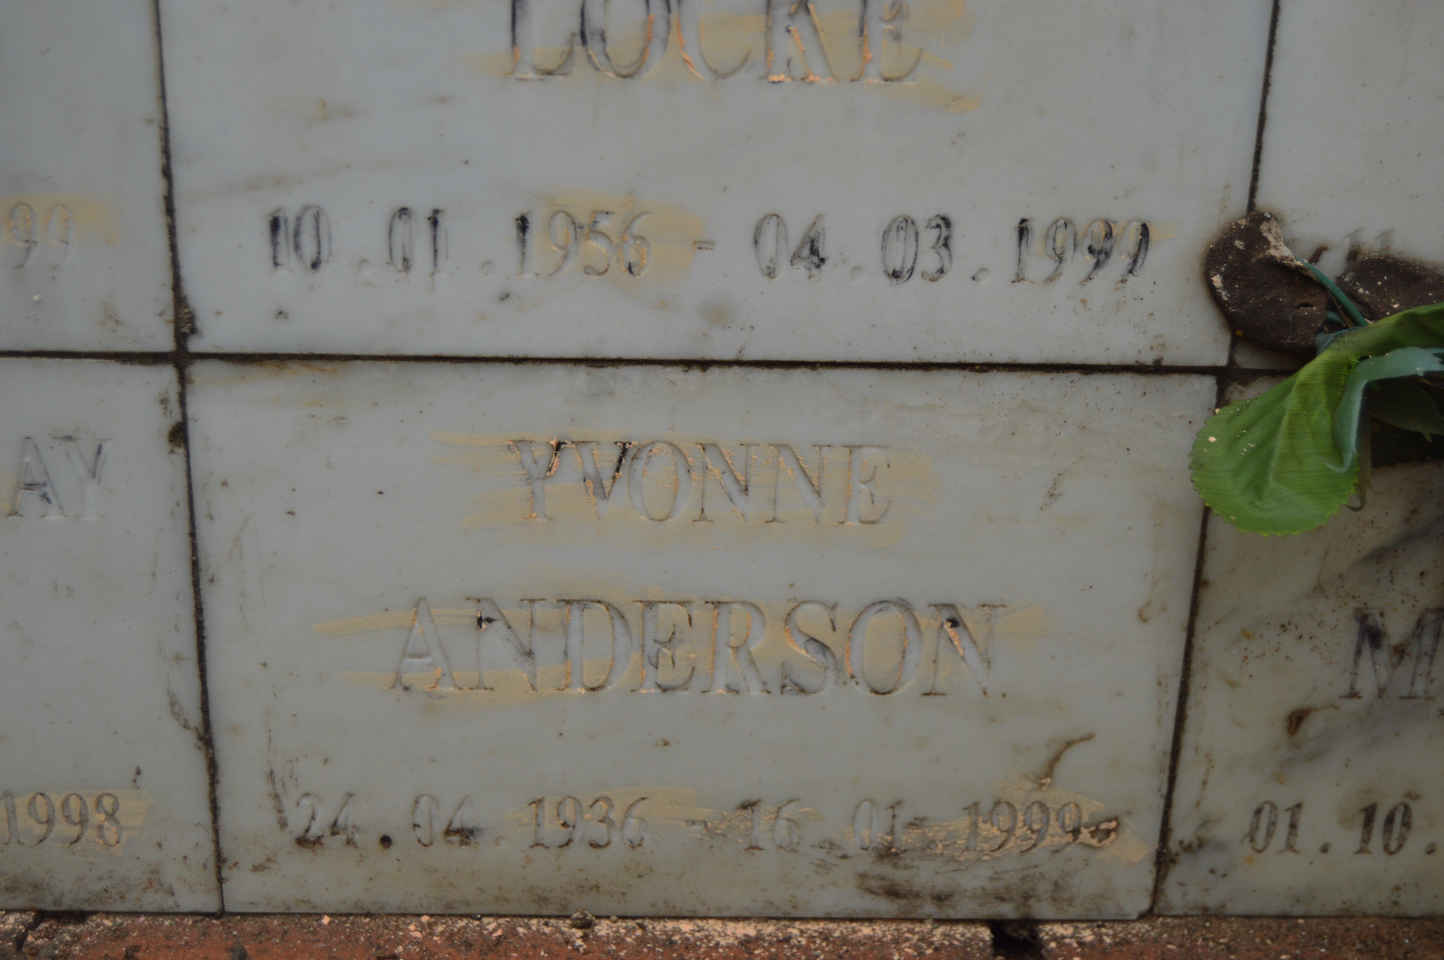 ANDERSON Yvonne 1936-1999